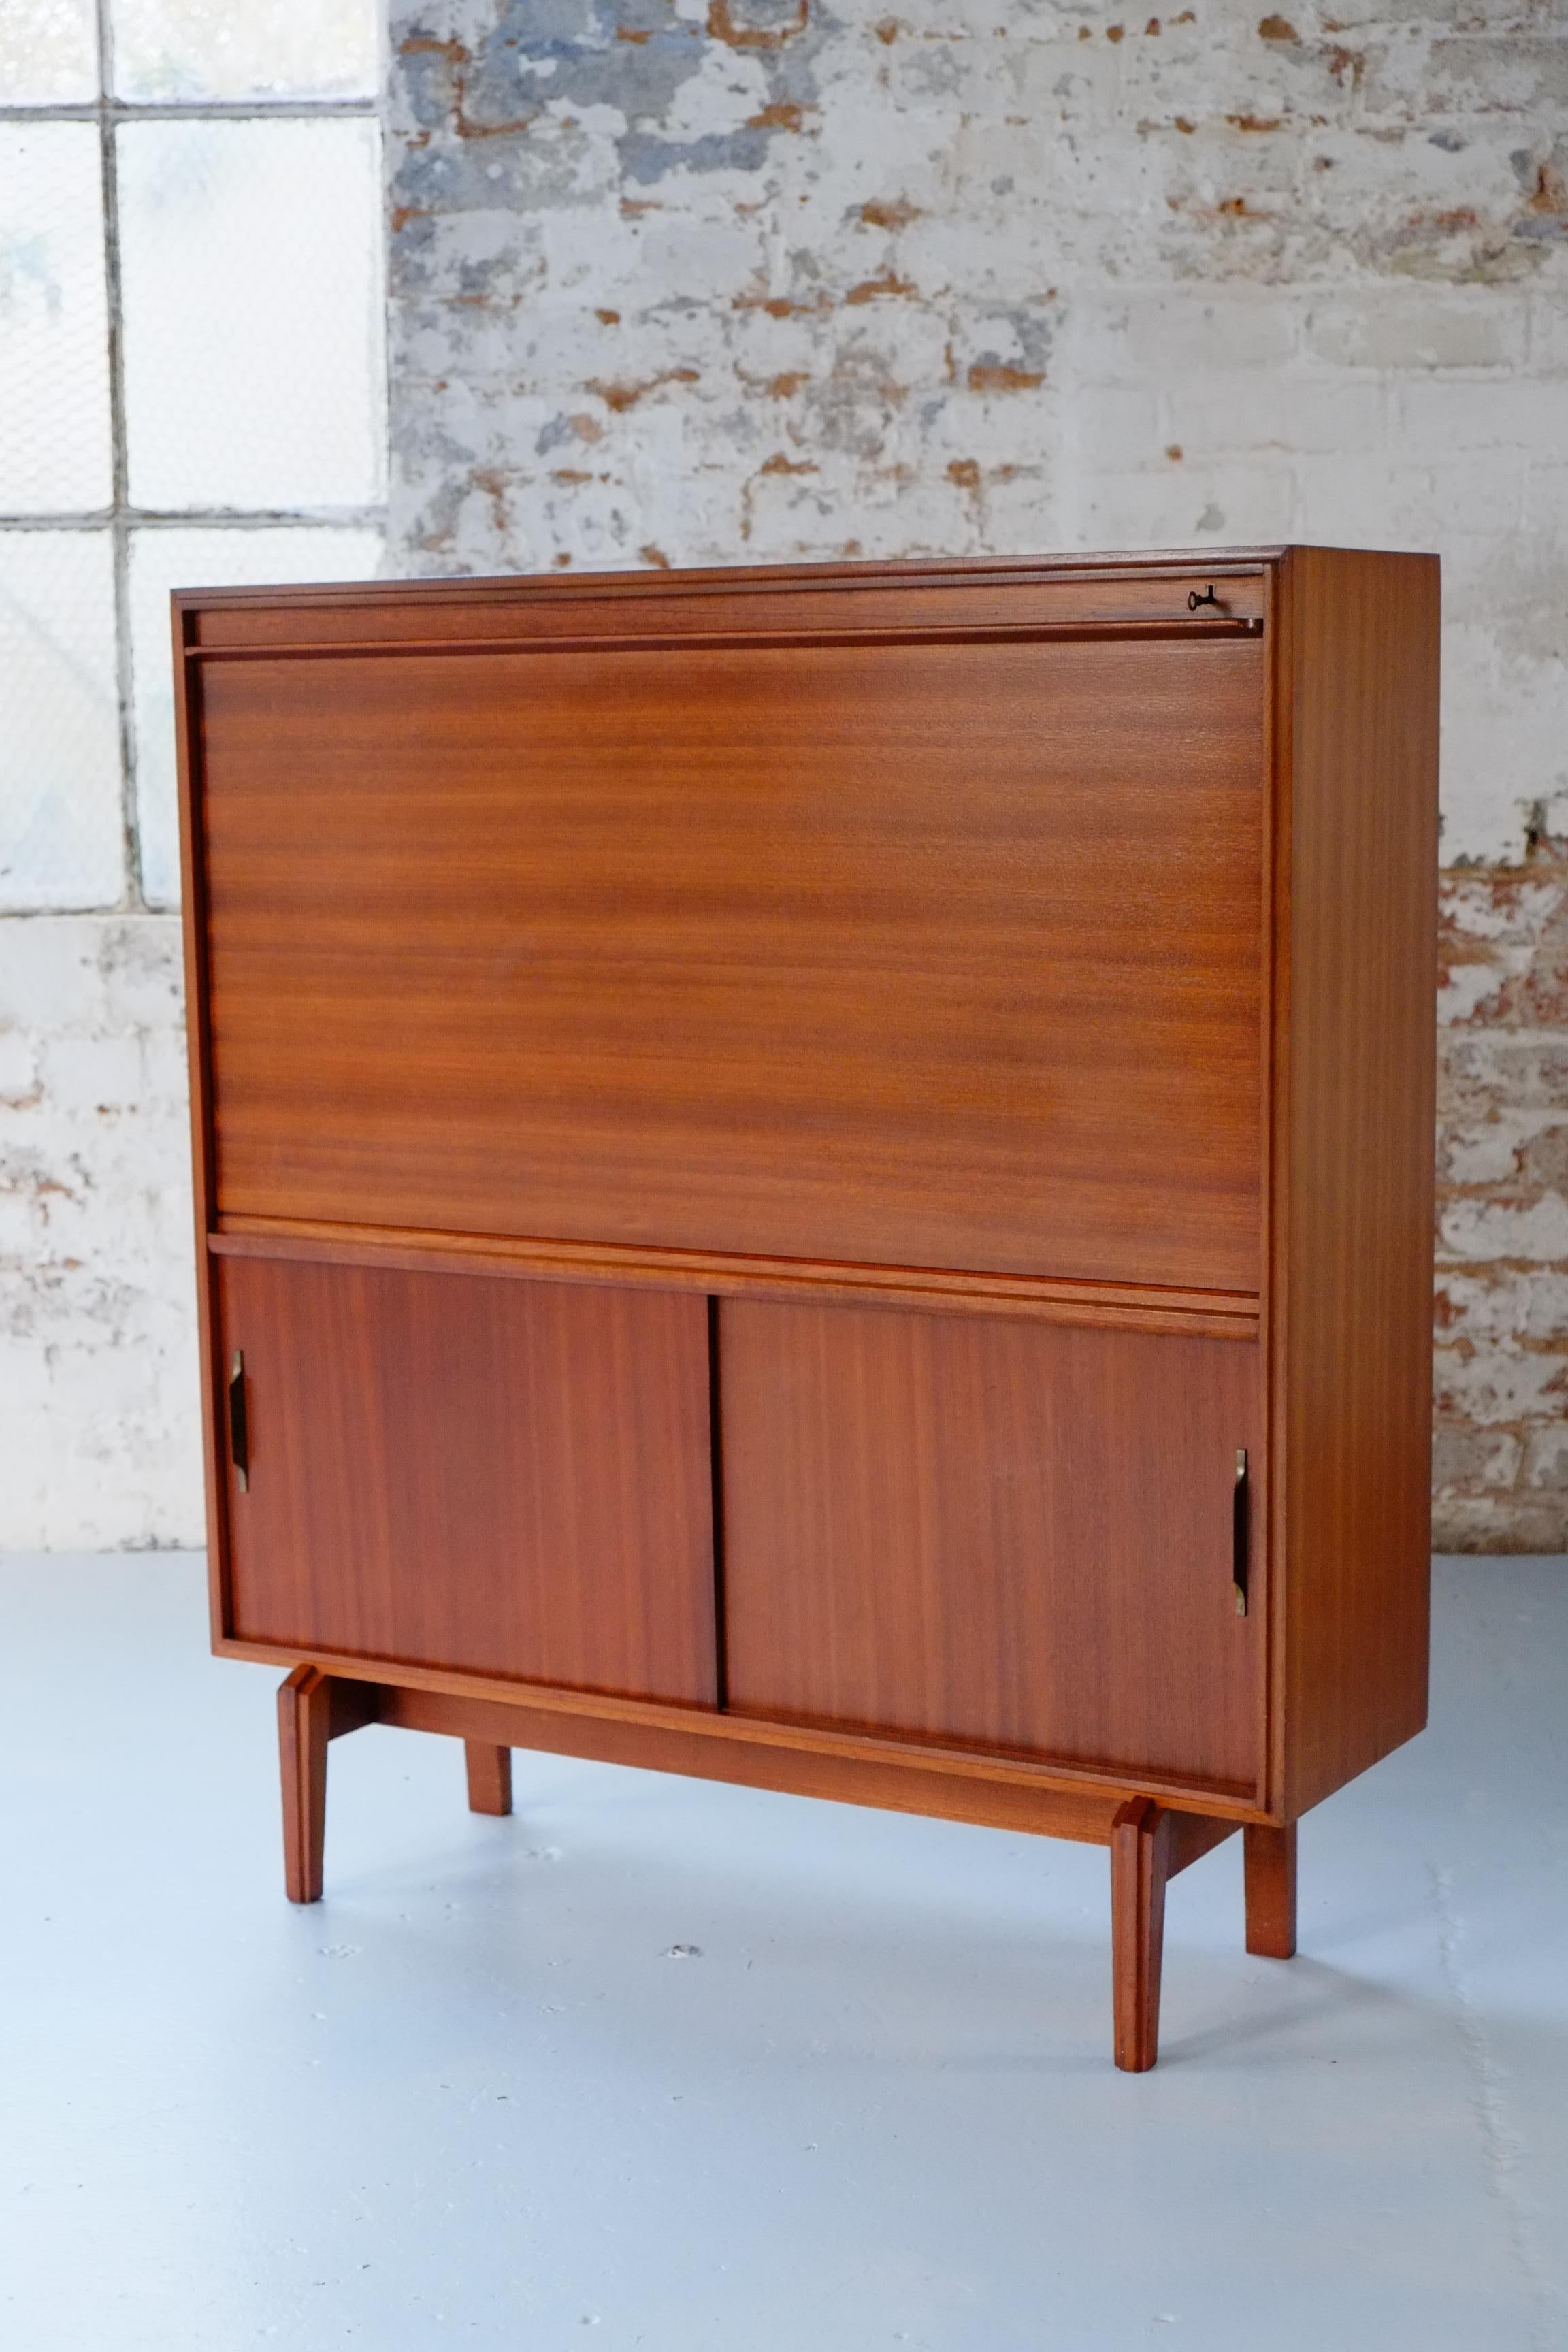 This is a beautiful compact vintage drinks cabinet from the 1960s. The Mid-century modern cabinet was designed by Robert Heritage as part of the Multi-Width series for Beaver and Tapley. Beaver and Tapley was a mid-century British furniture